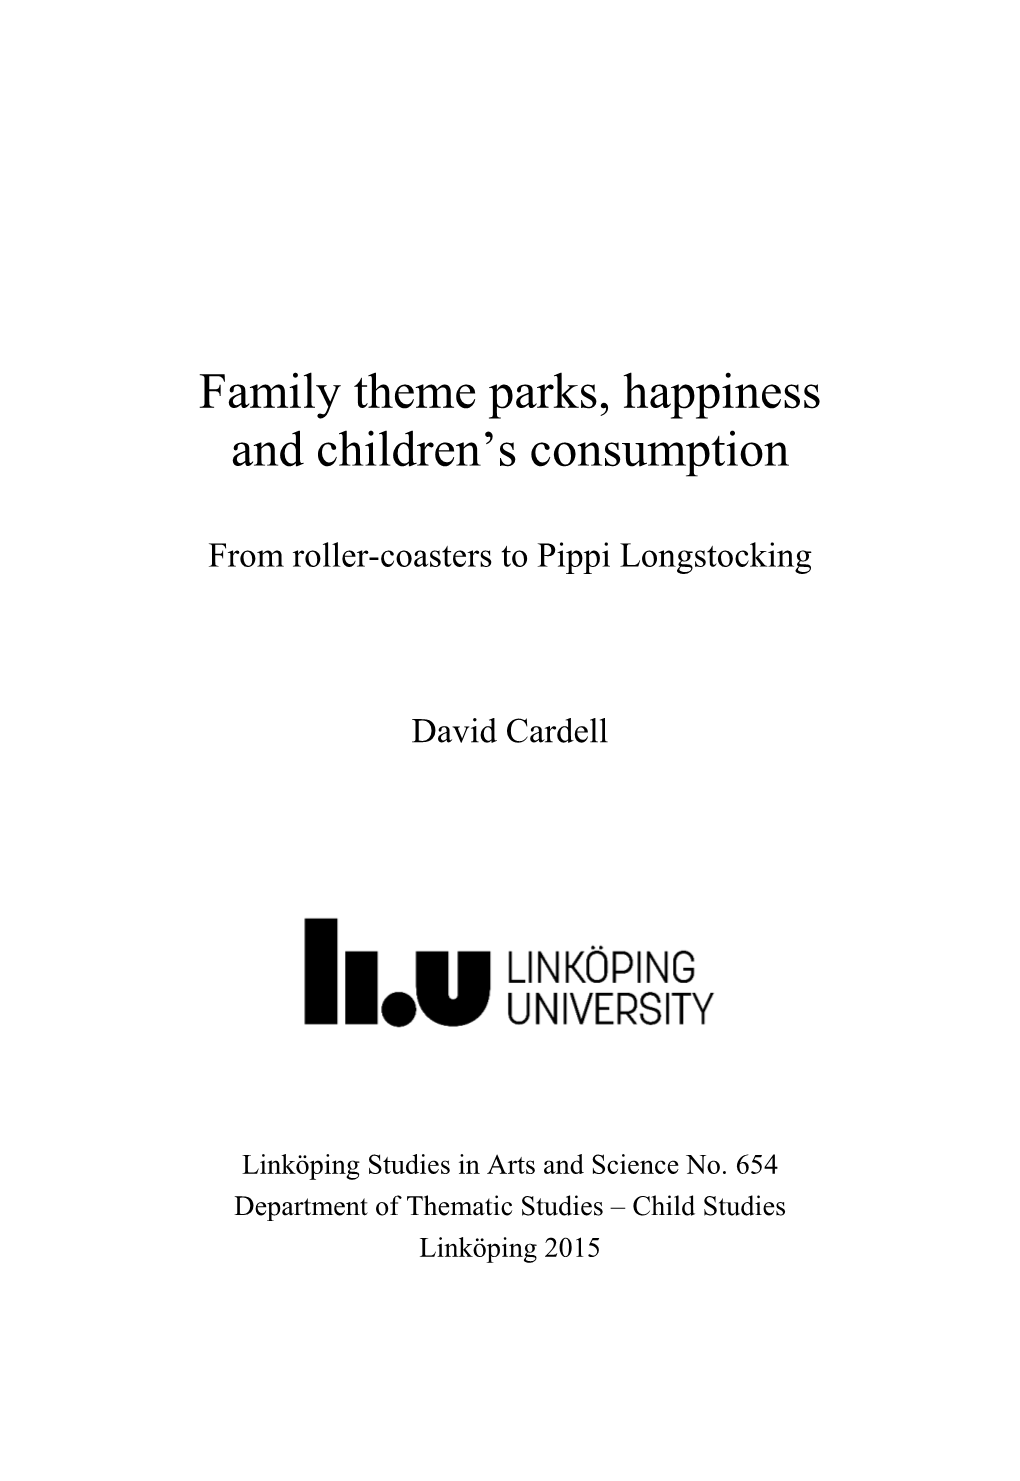 Family Theme Parks, Happiness and Children's Consumption